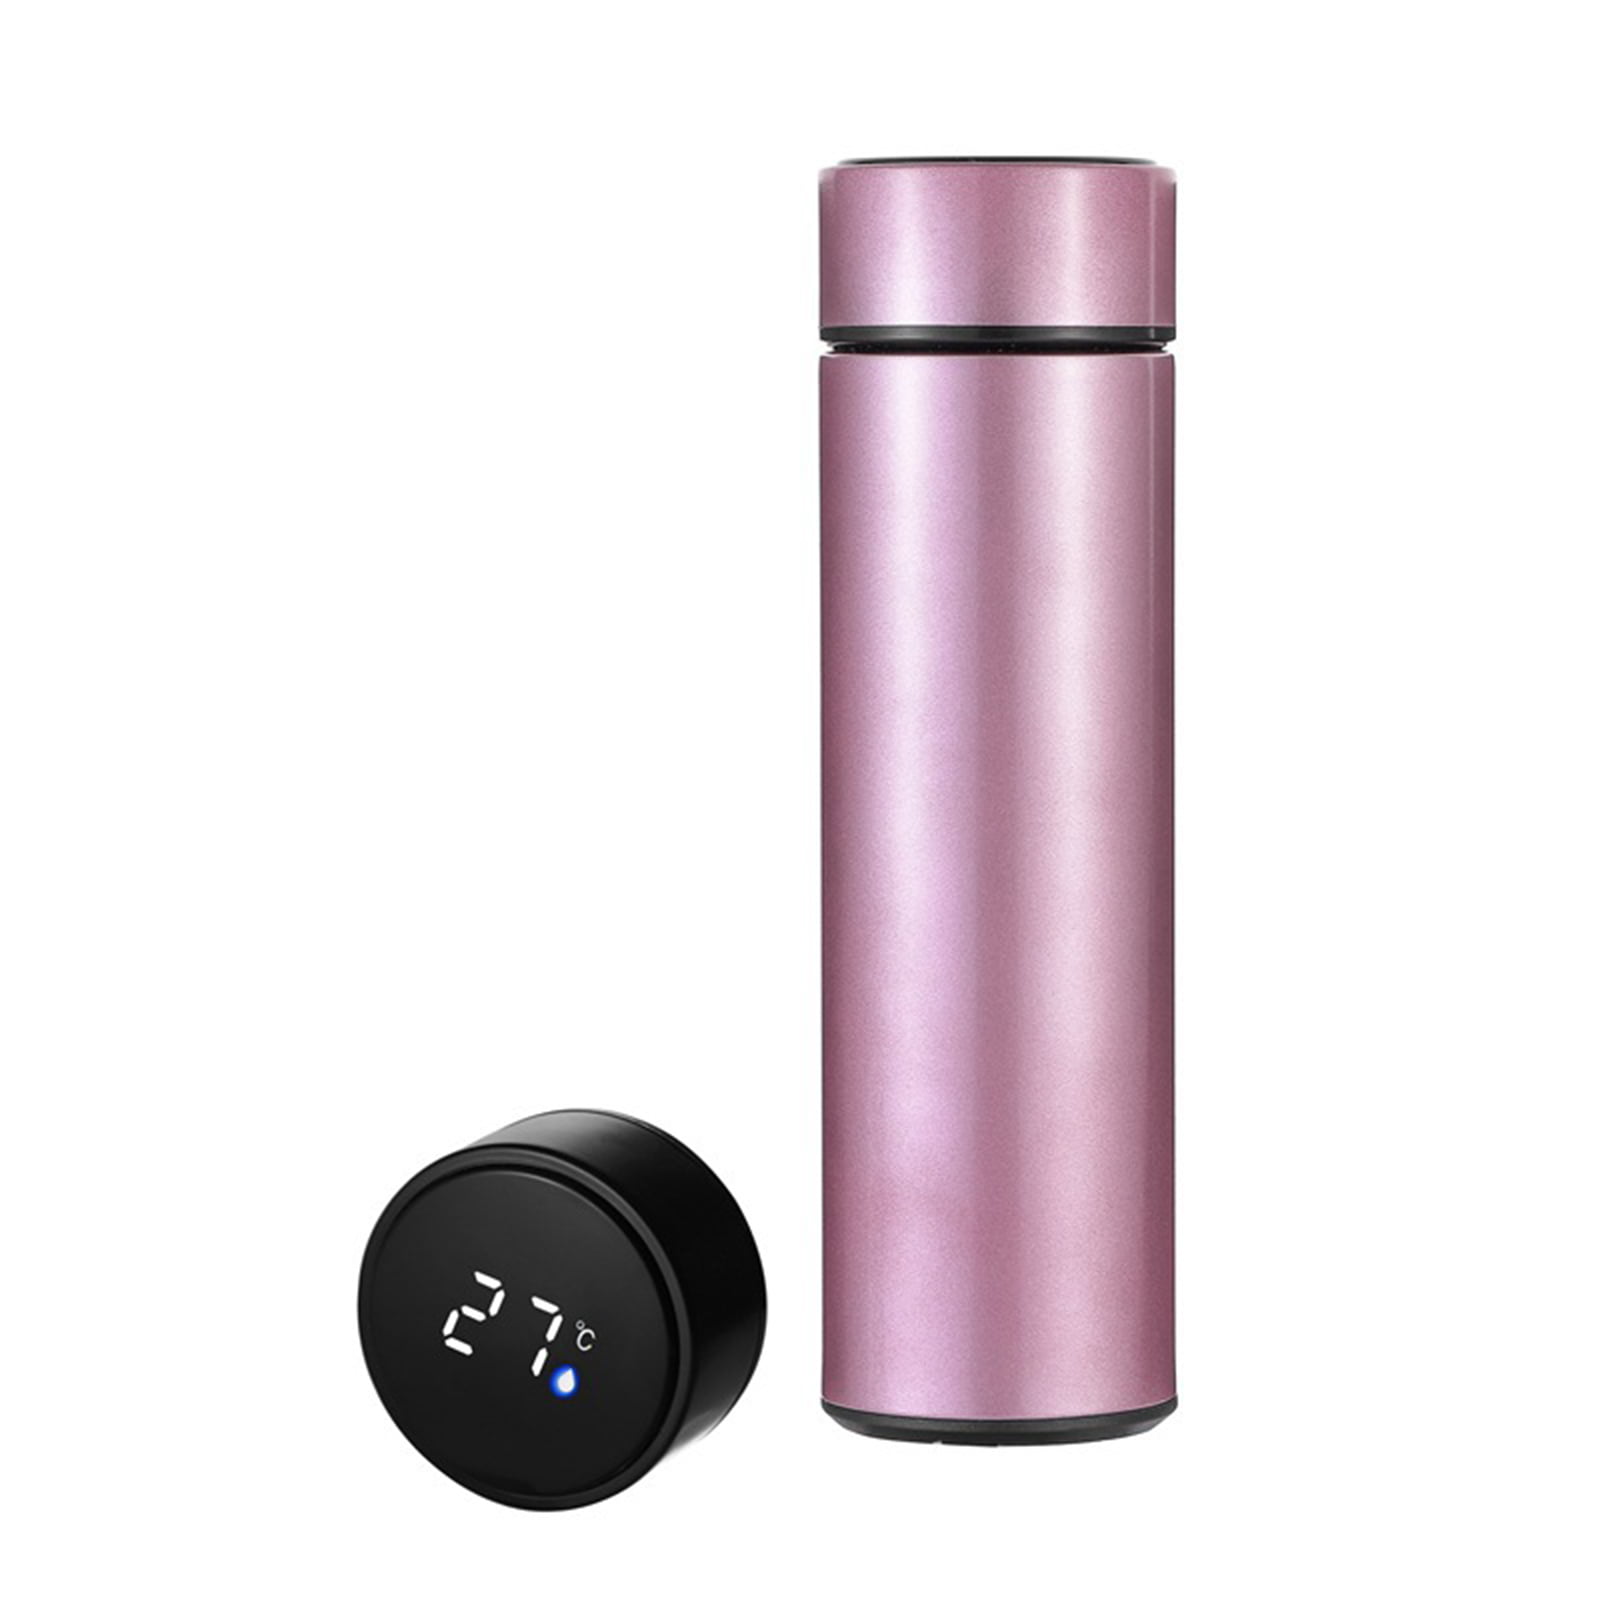 Smart Insulated Mug Stainless Steel Vacuum Cup LED Temperature Display 500ml. 